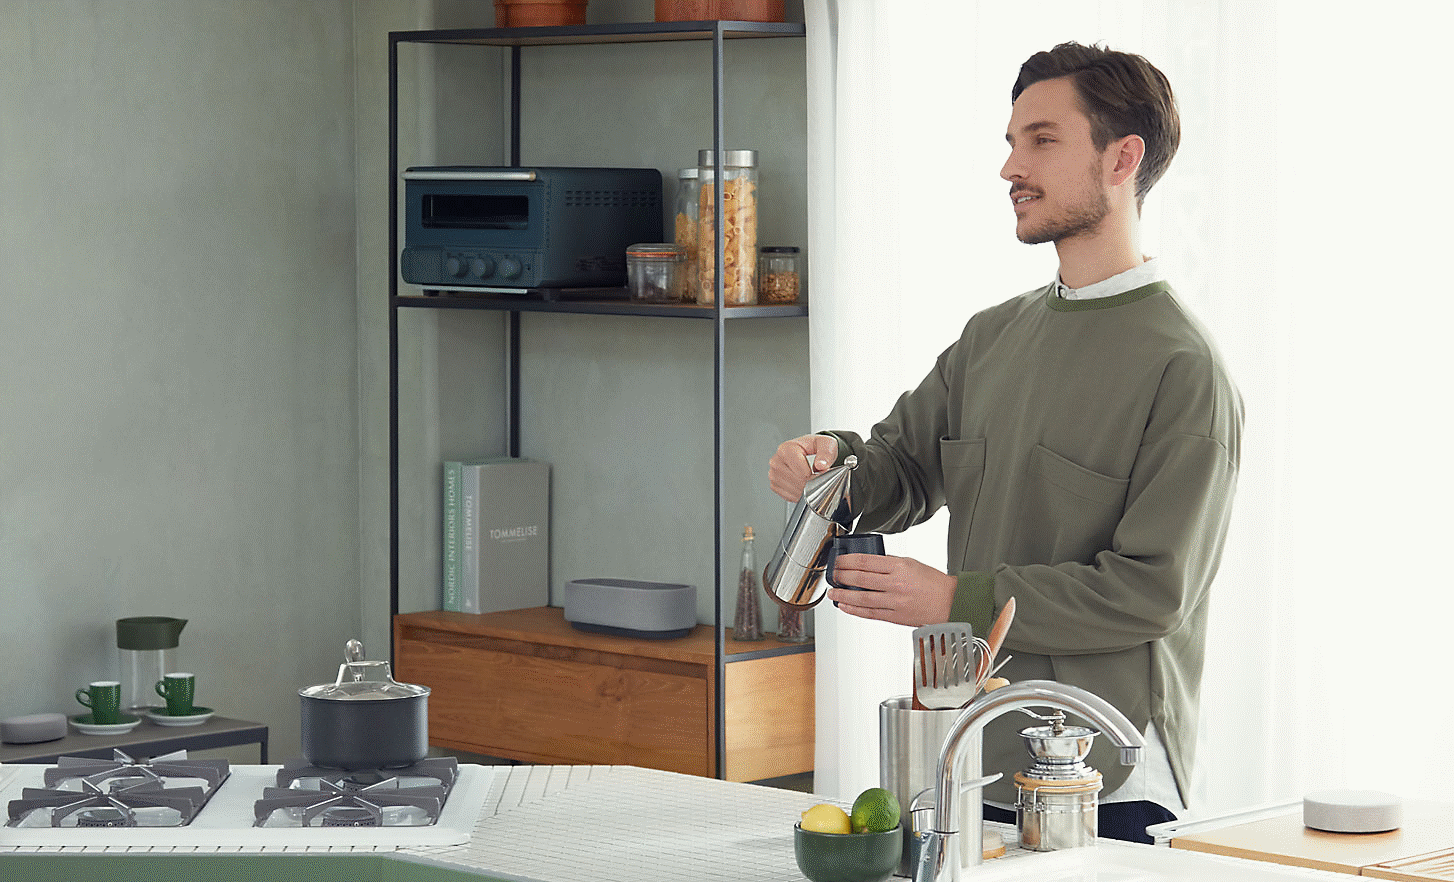 Image of a person serving coffee in a kitchen surrounded by the three HT-AX7 speakers